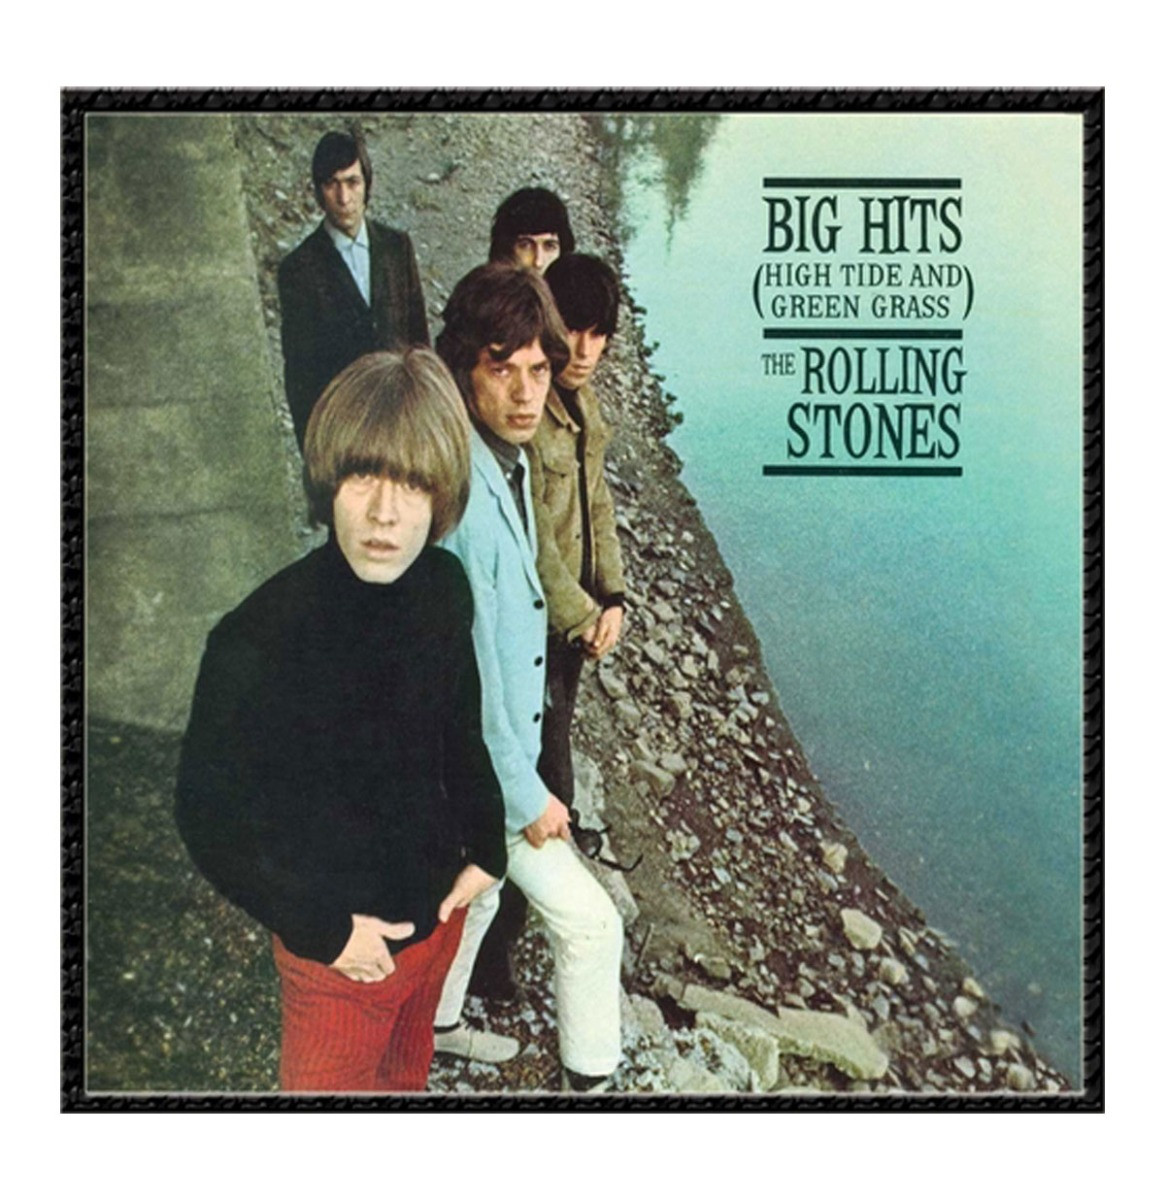 The Rolling Stones - Big Hits (High Tide and Green Grass) LP Remastered